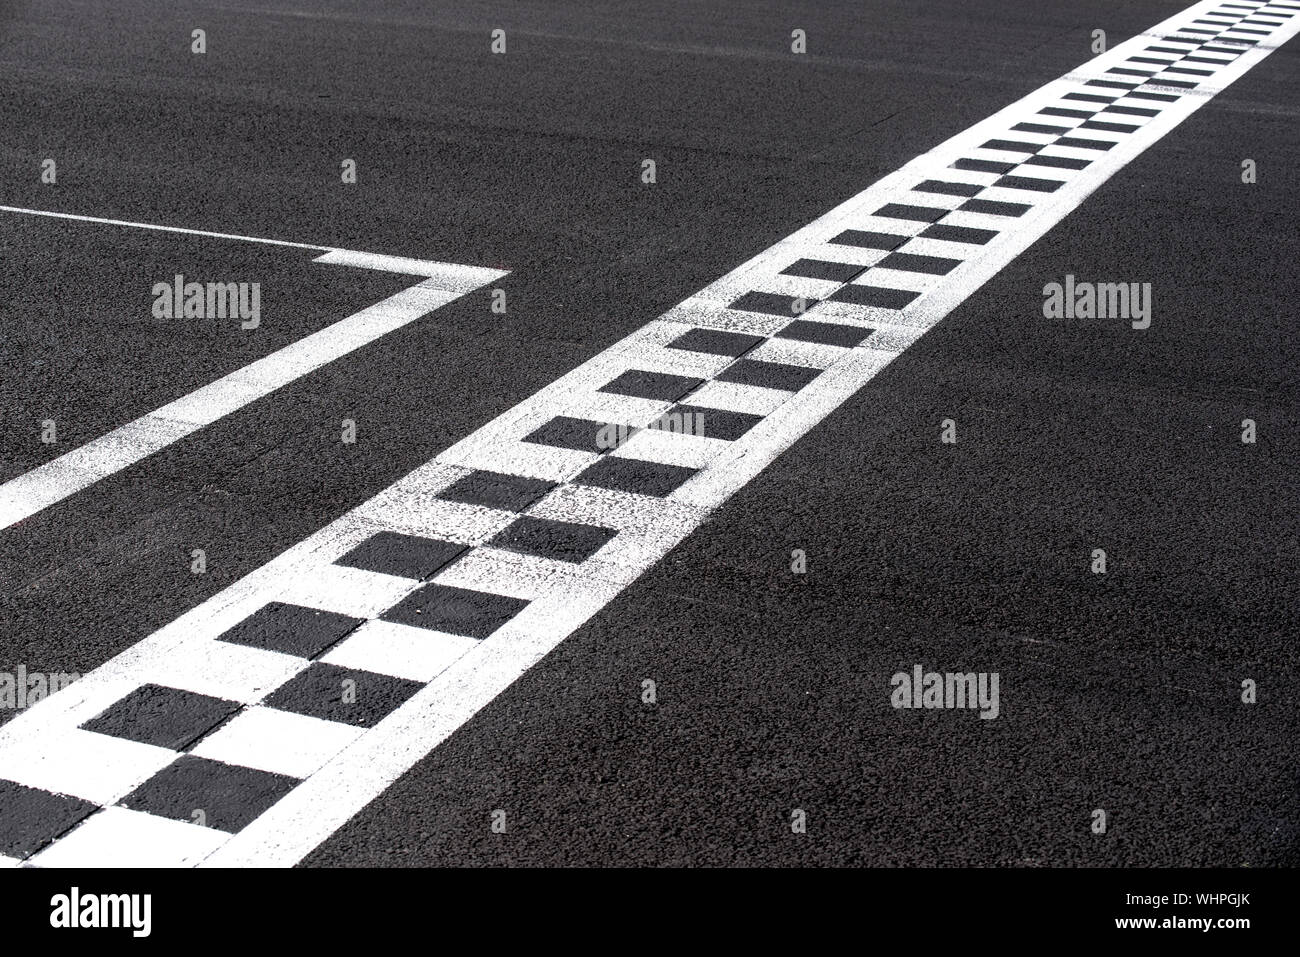 High Angle View Of Motor Racing Track On Road Stock Photo